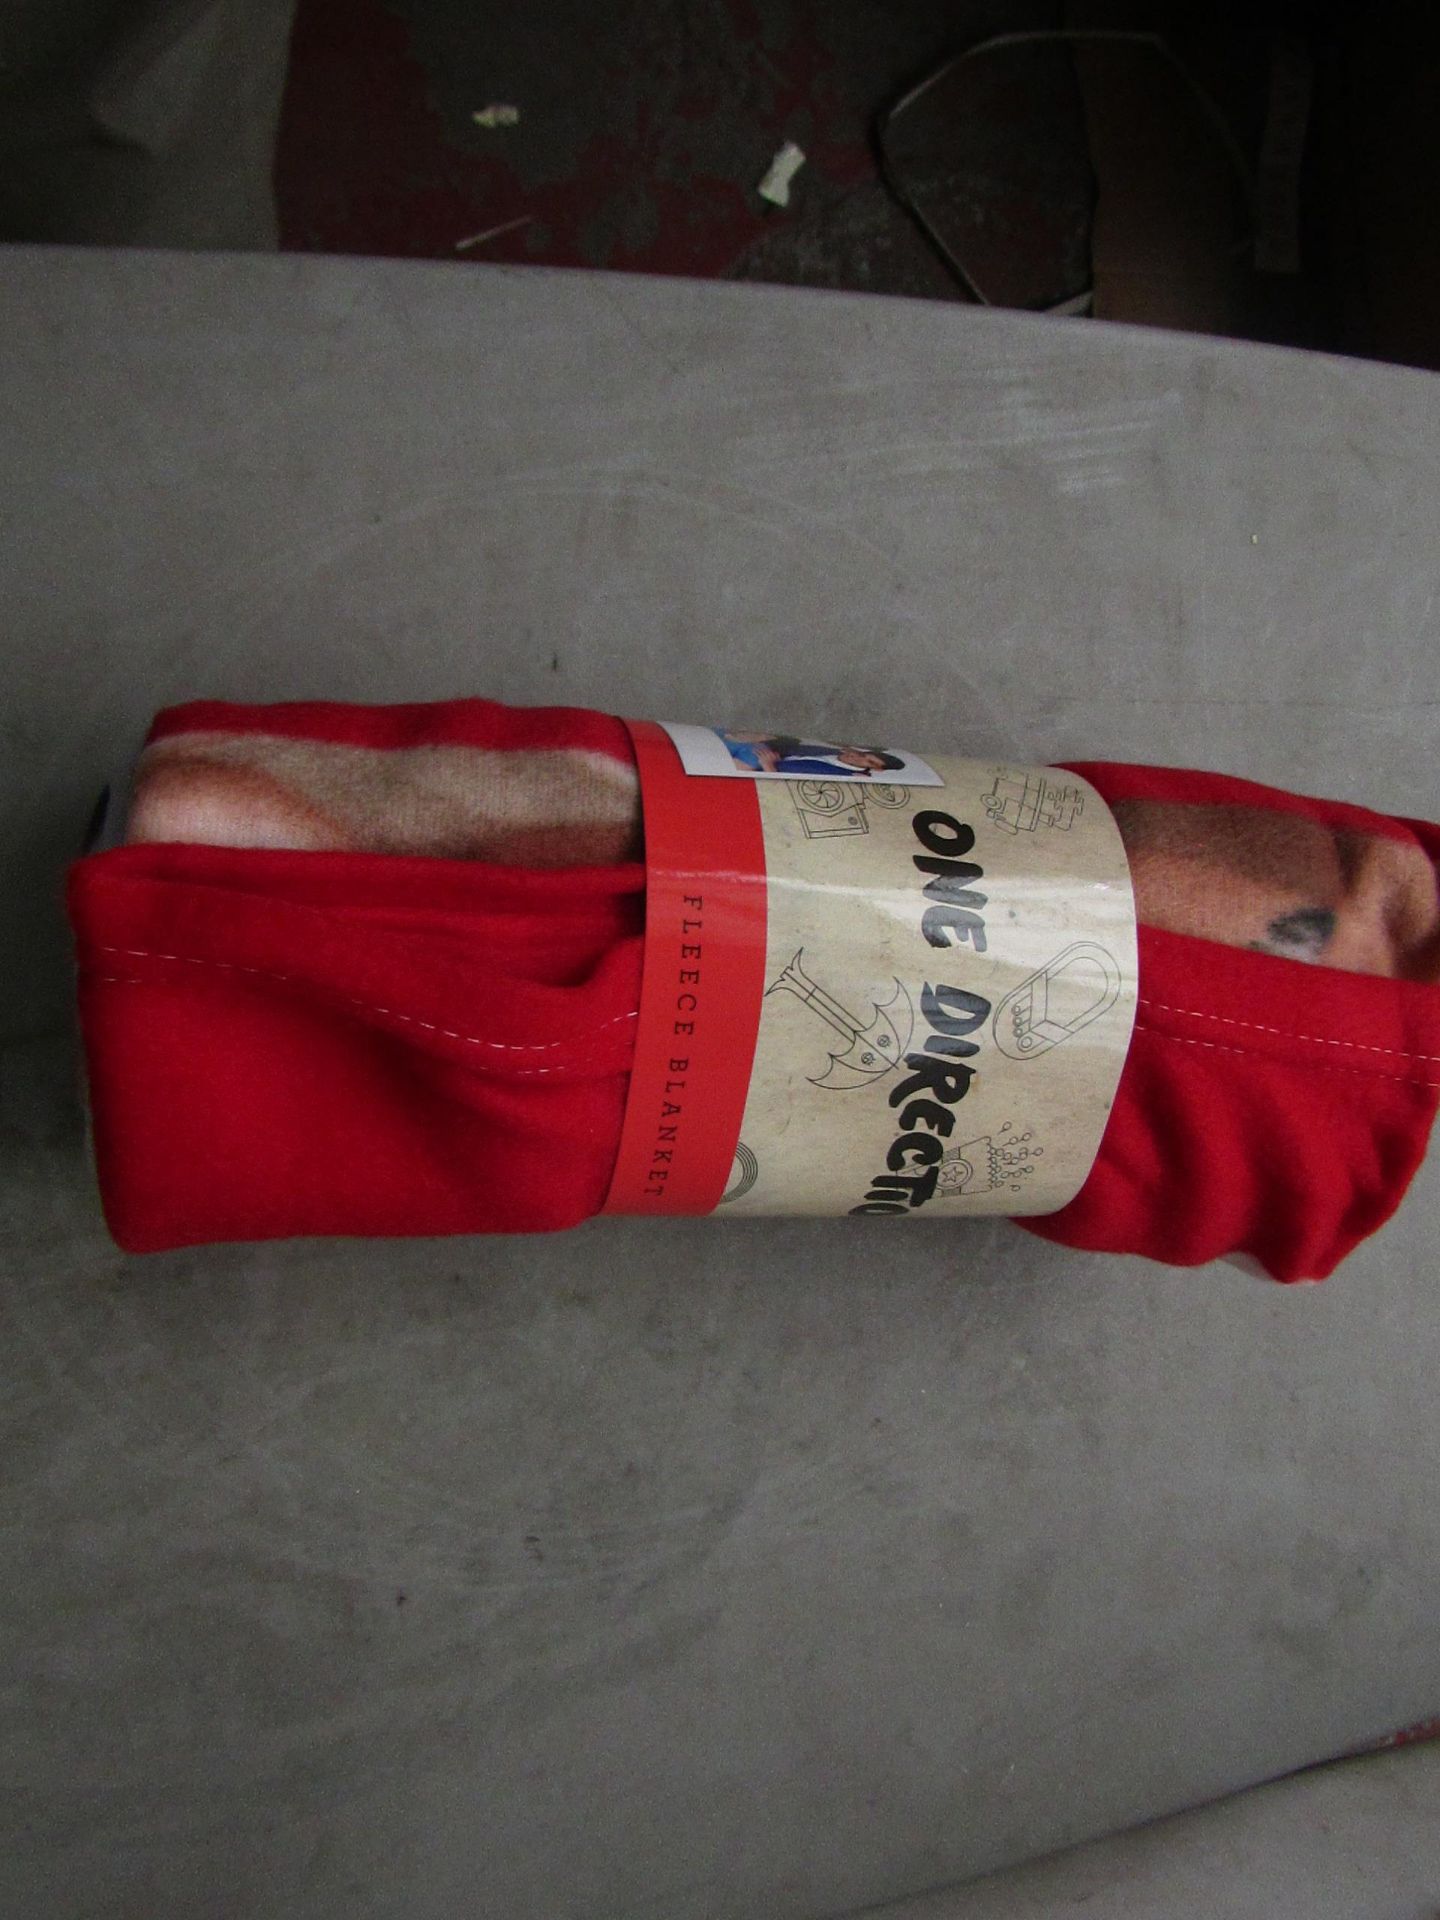 2x One Direction Fleece Blankets - New with tags.